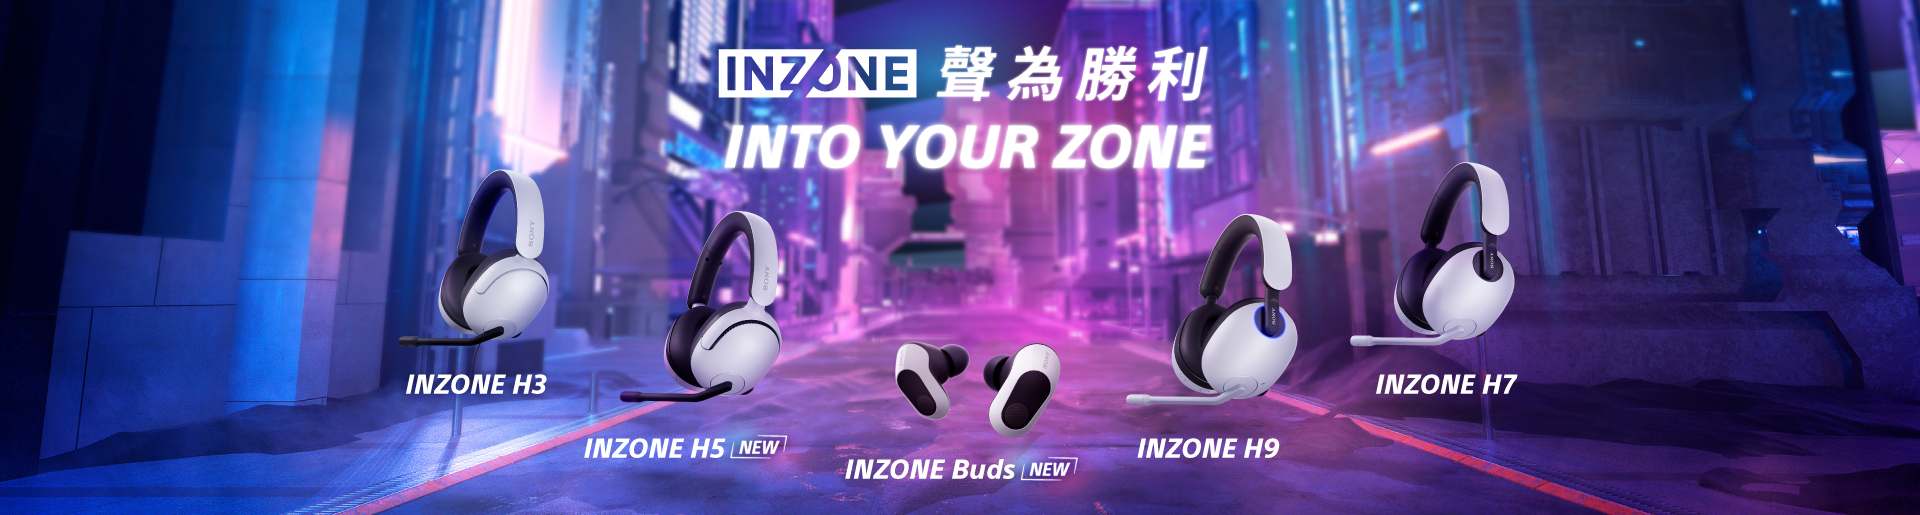 INZONE 聲為勝利 INTO YOUR ZONE